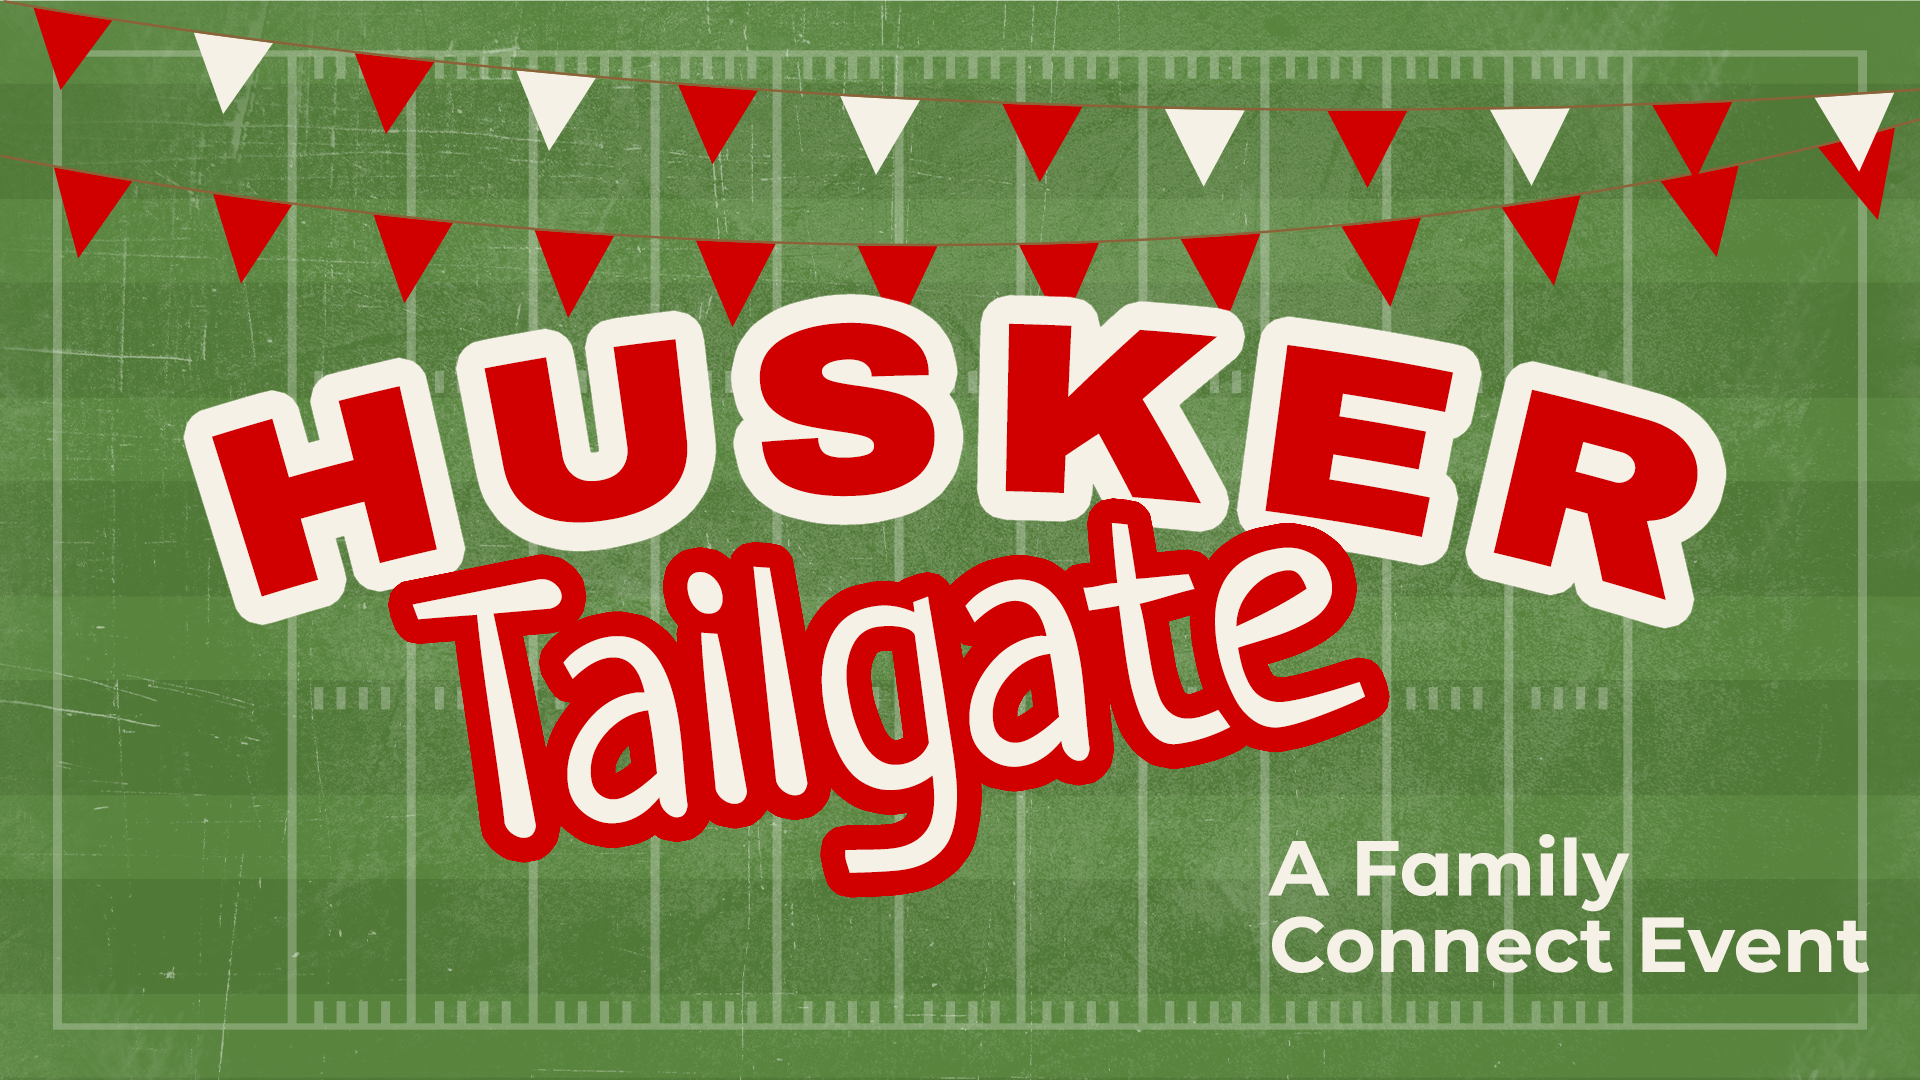 Husker tailgate: A Family Connect Event